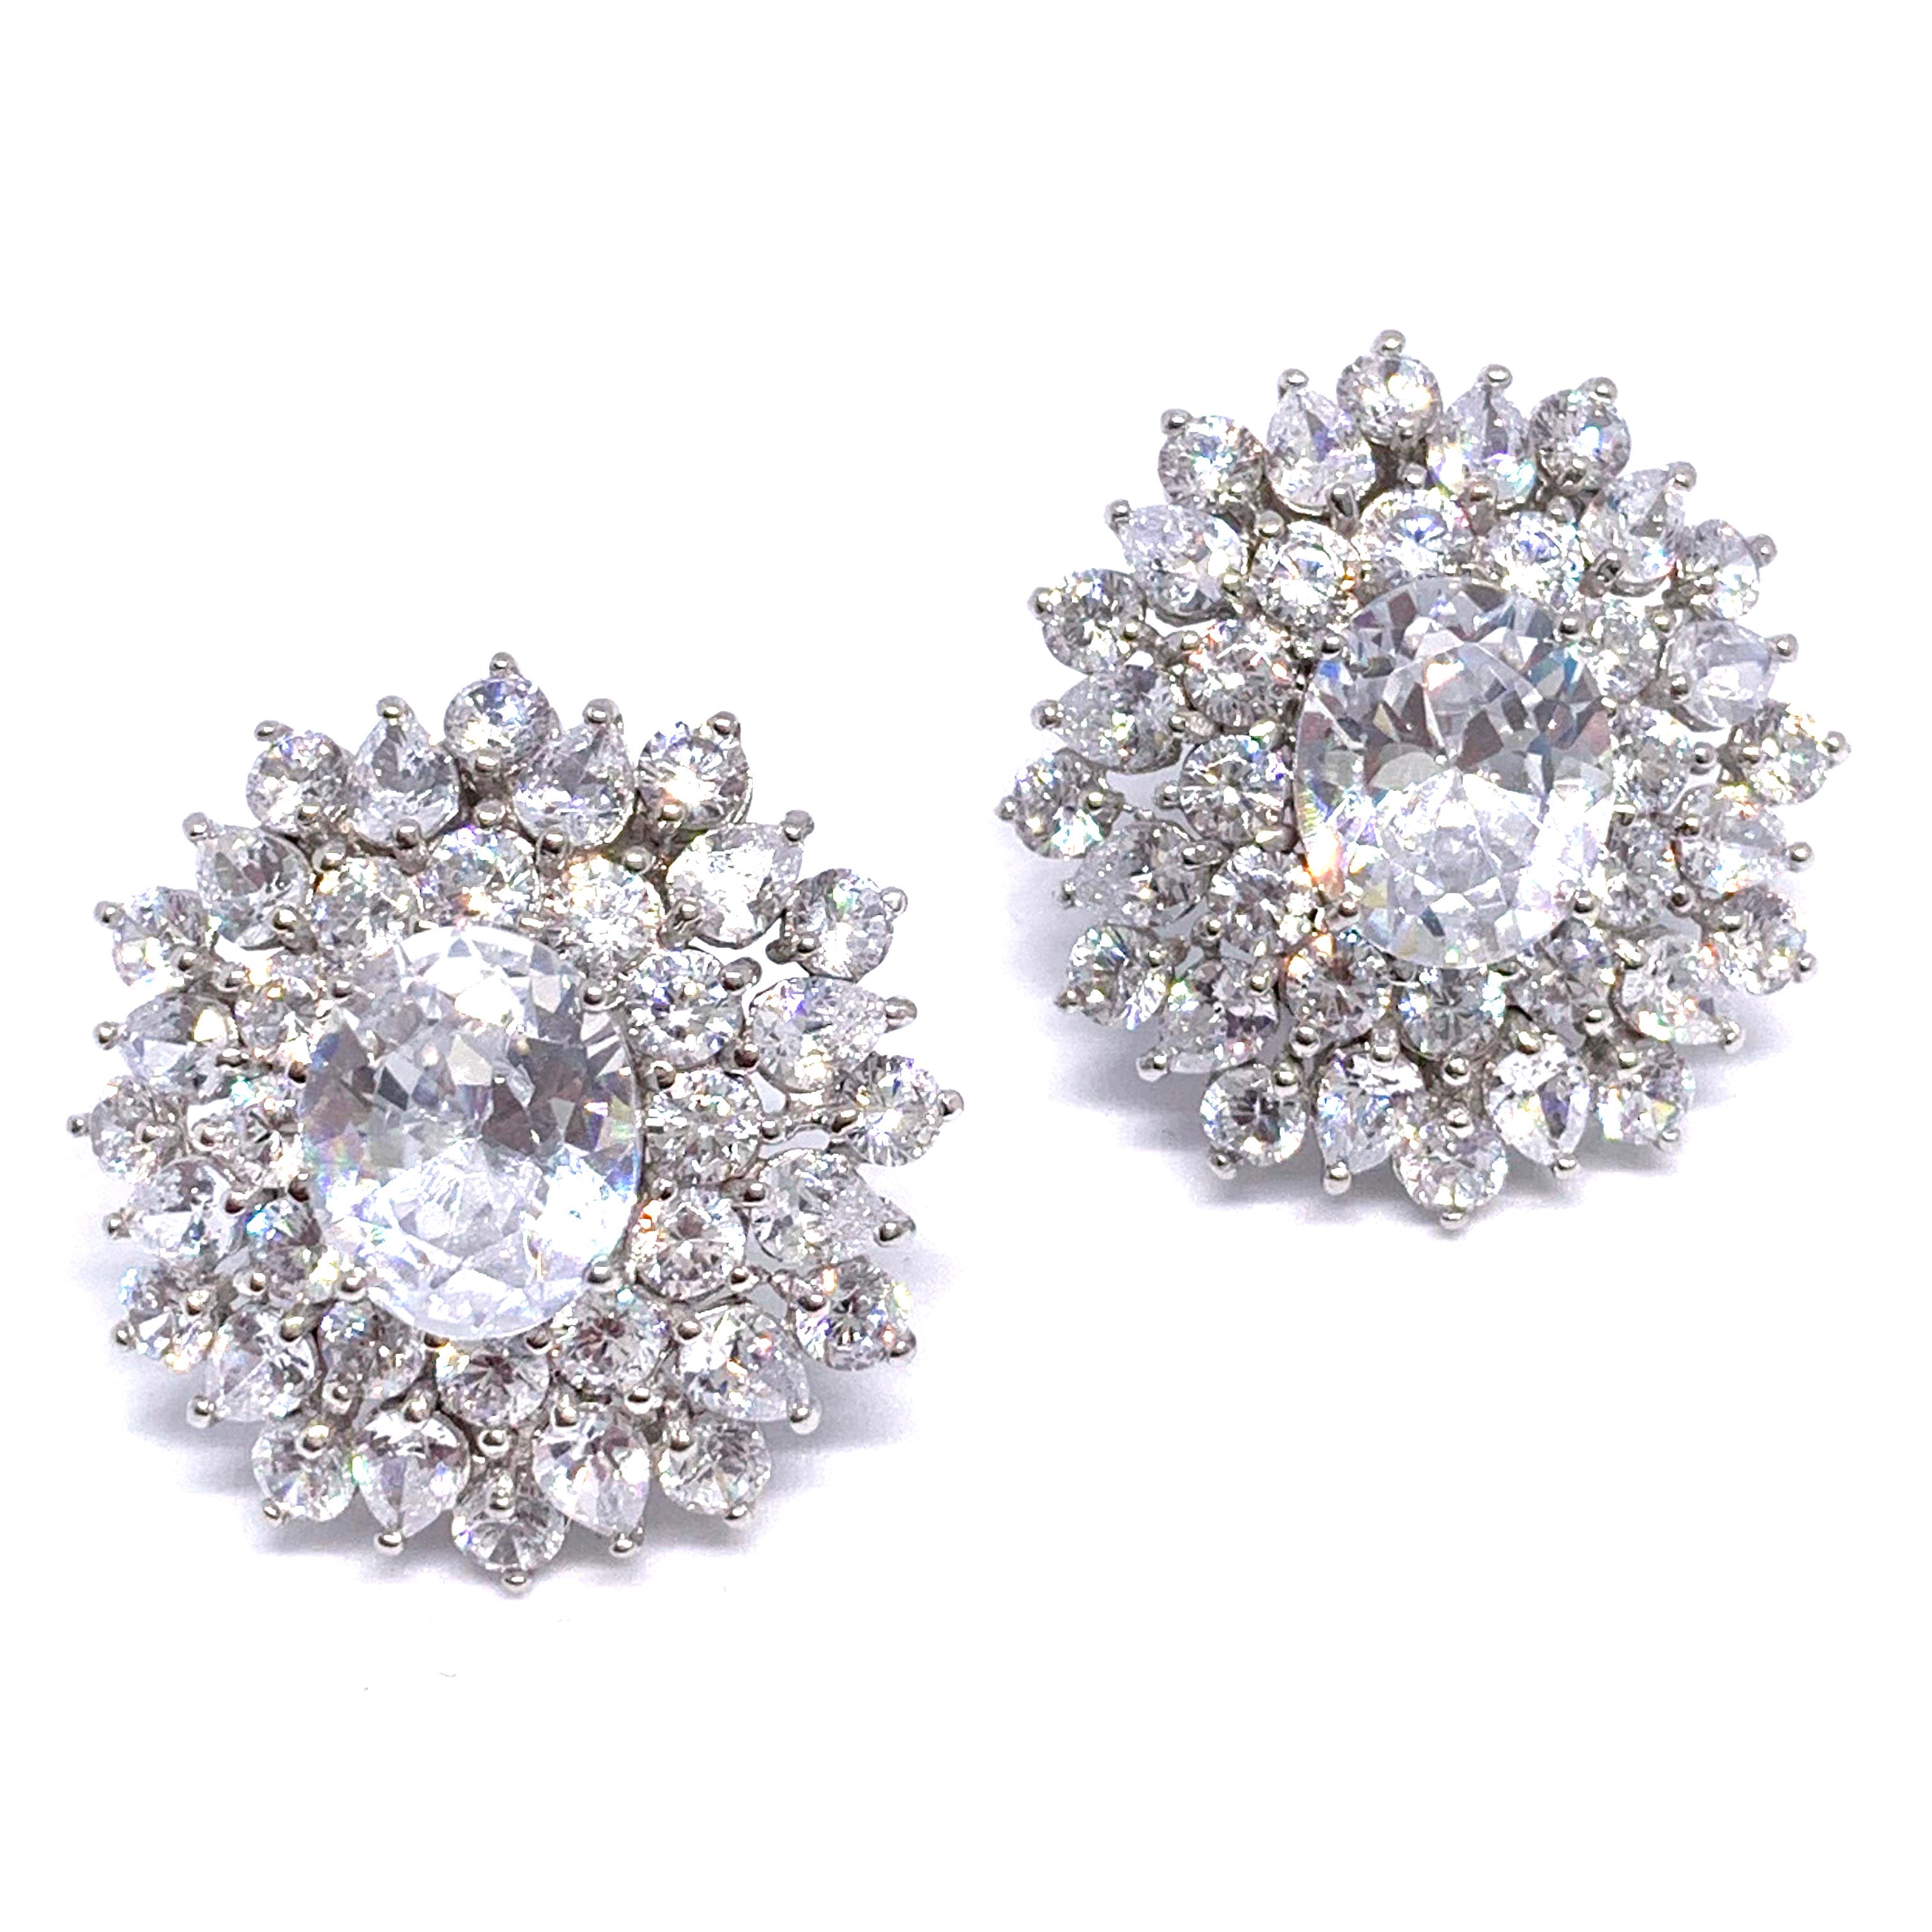 Stunning Bijoux Num elegant faux diamond cluster earrings. 

These earrings feature top quality oval-shape faux diamonds, adorned with 72 pcs of pear shape and round cubic zirconia, handset in platinum rhodium plated sterling silver. The earrings